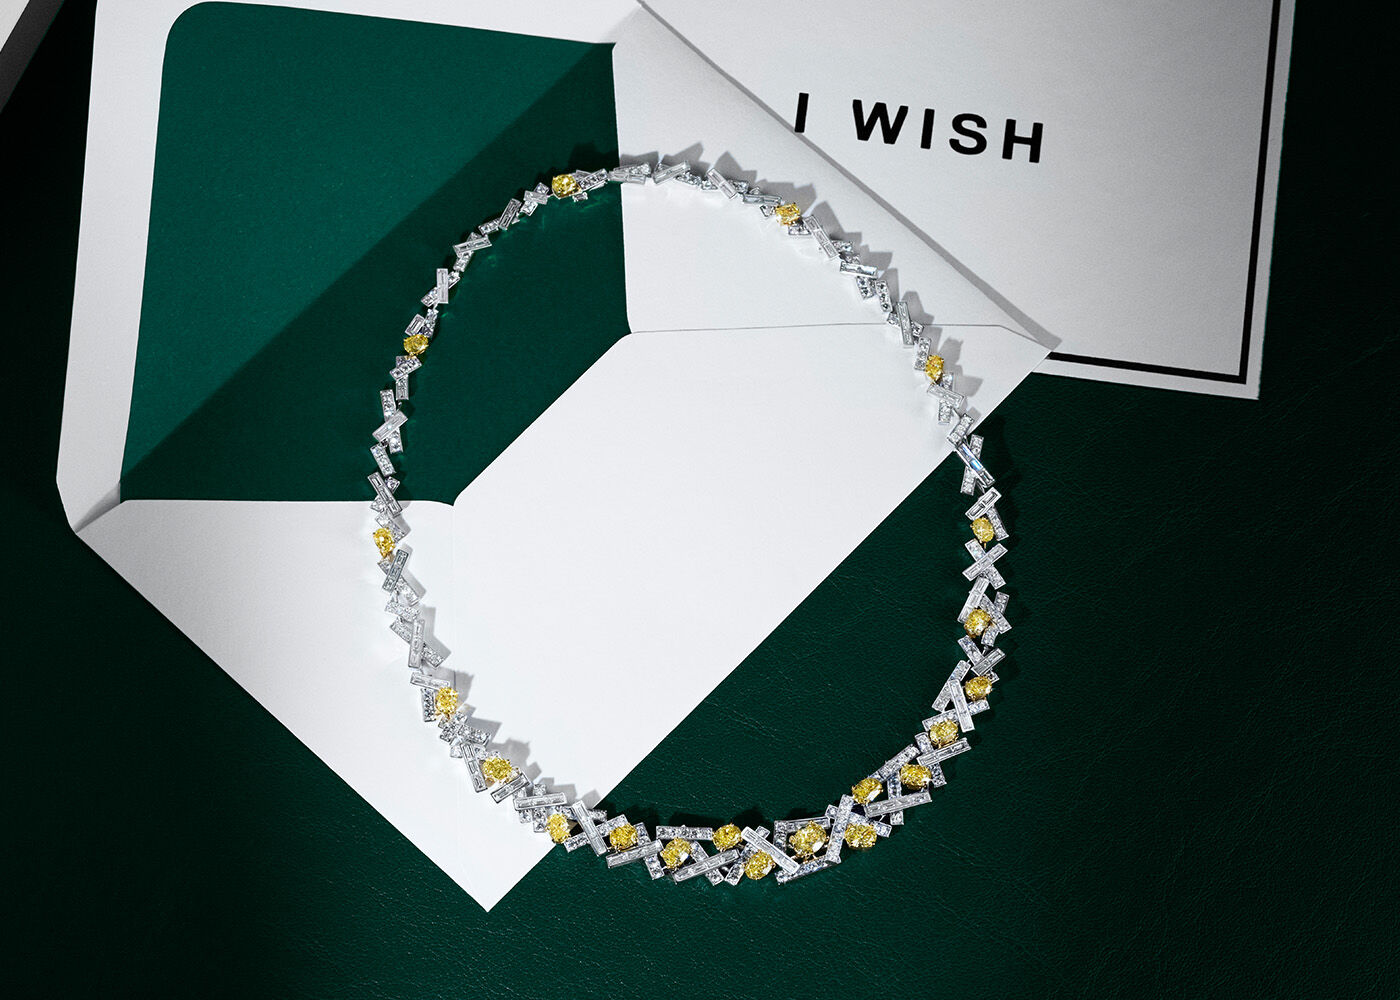 Yellow Diamond Jewellery, still life of Graff Threads Yellow and White Diamond High Jewellery necklace a top an 'I WISH' festive greetings card